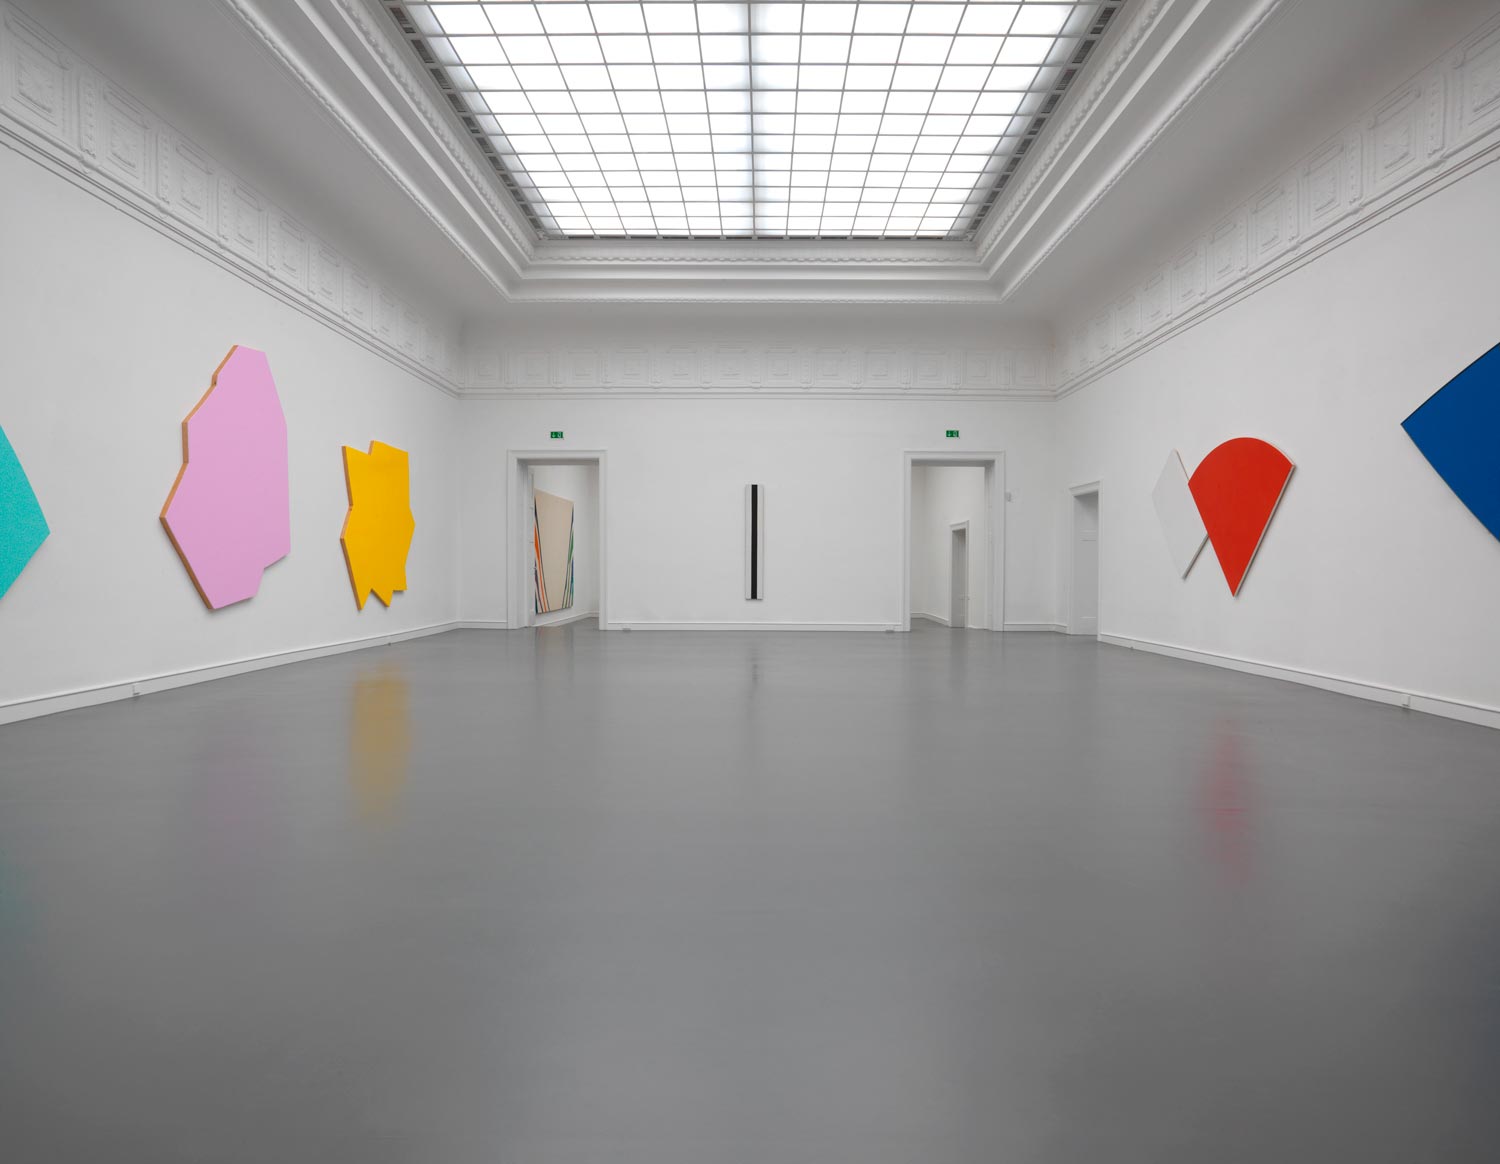 "Who's afraid of Red, Yellow and Blue?", Staatliche Kunsthalle Baden-Baden